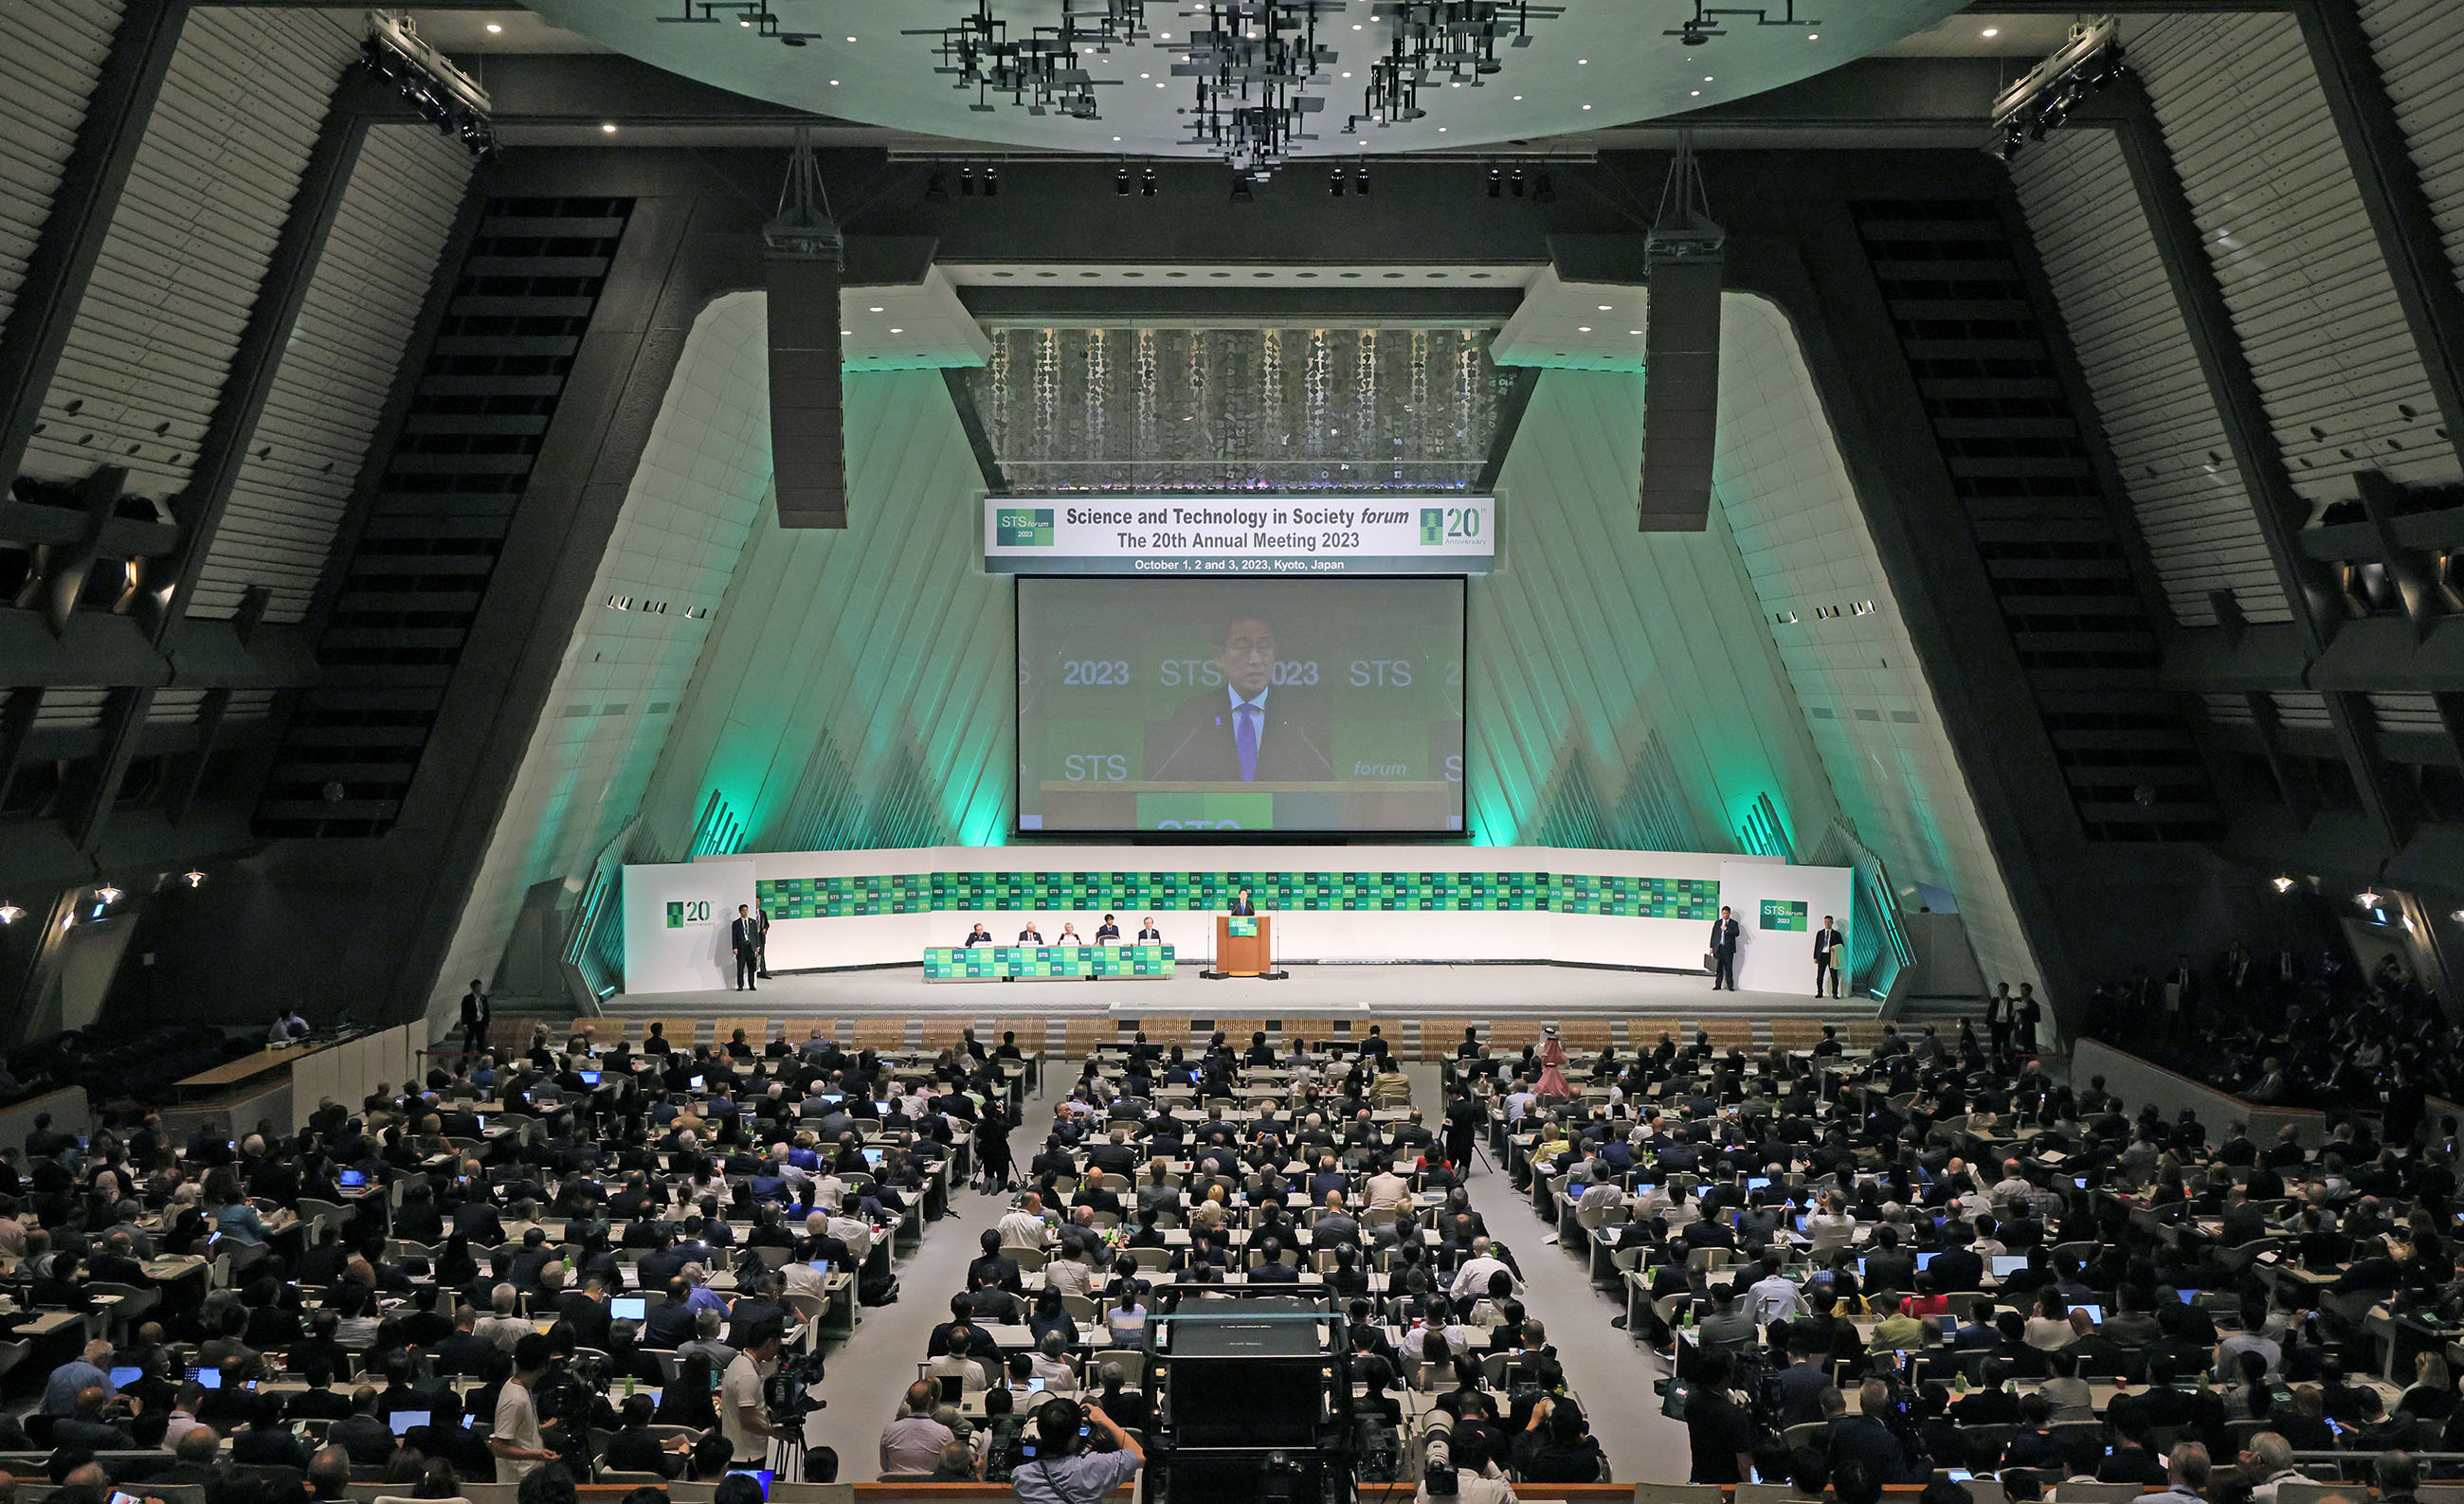 Prime Minister Kishida delivering an address at the opening ceremony (4)